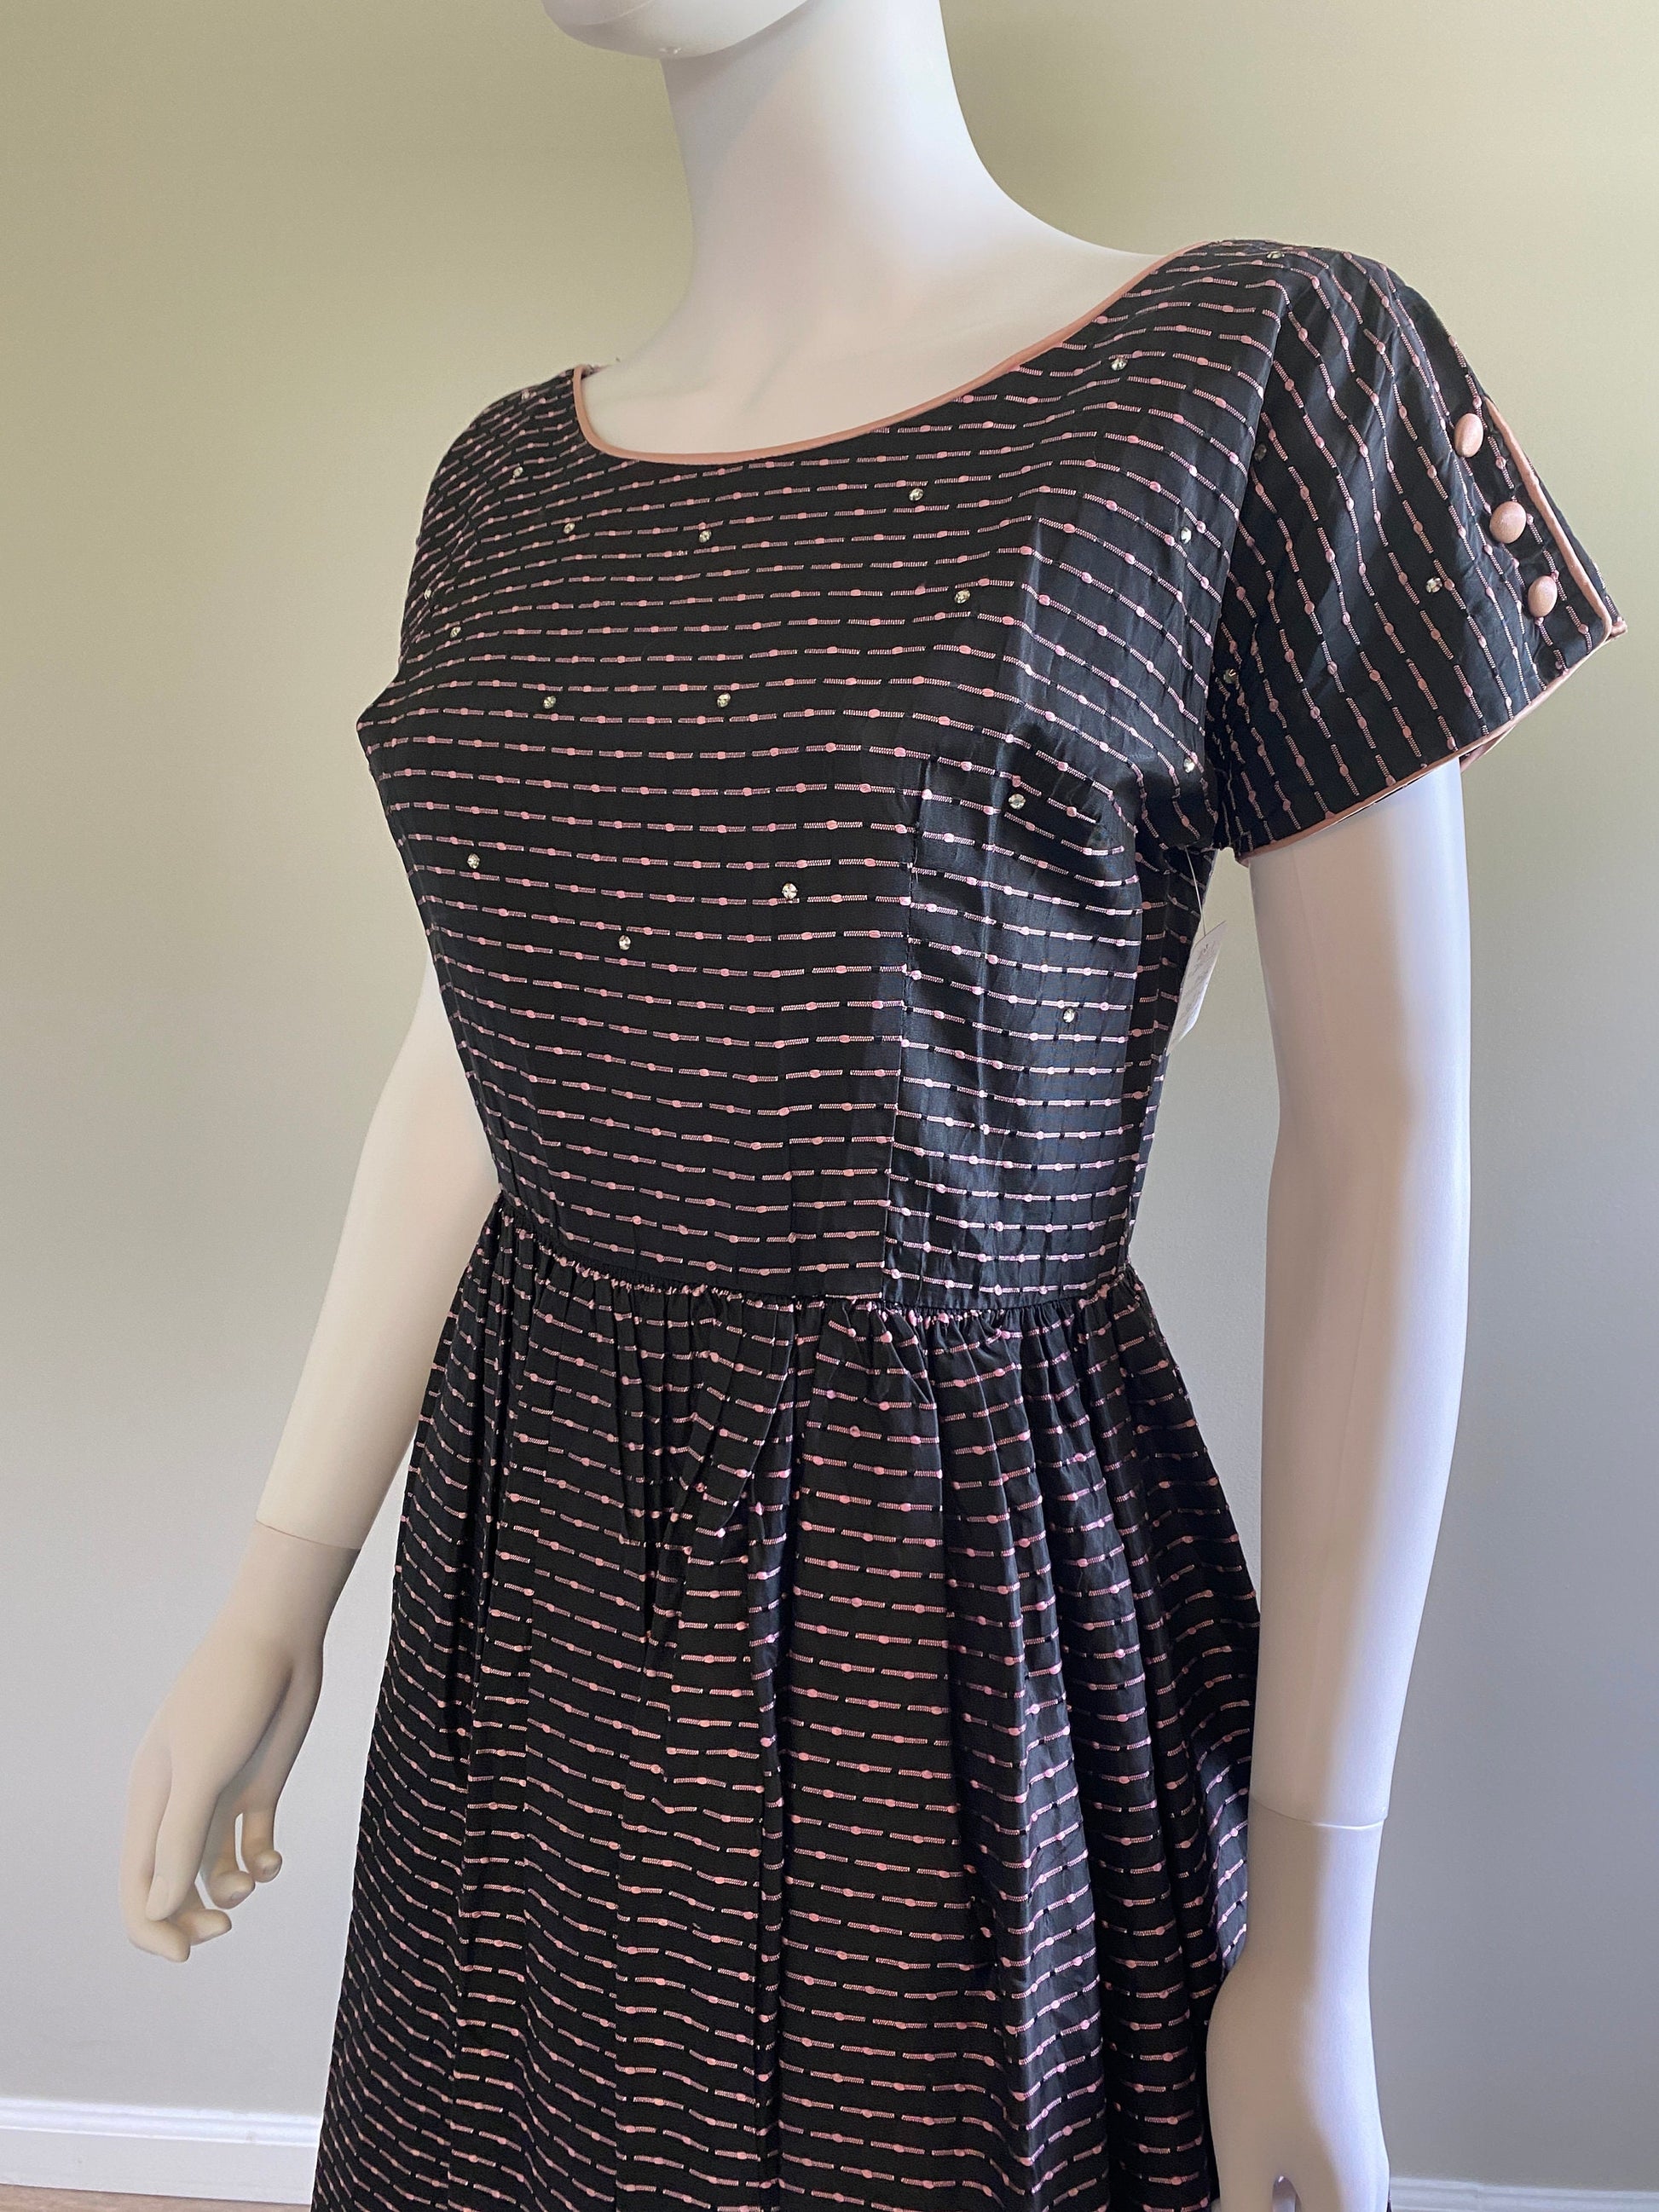 Vintage 1950s Black and Pink Fit and Flare Party Dress / 50s retro swing dress / Size M